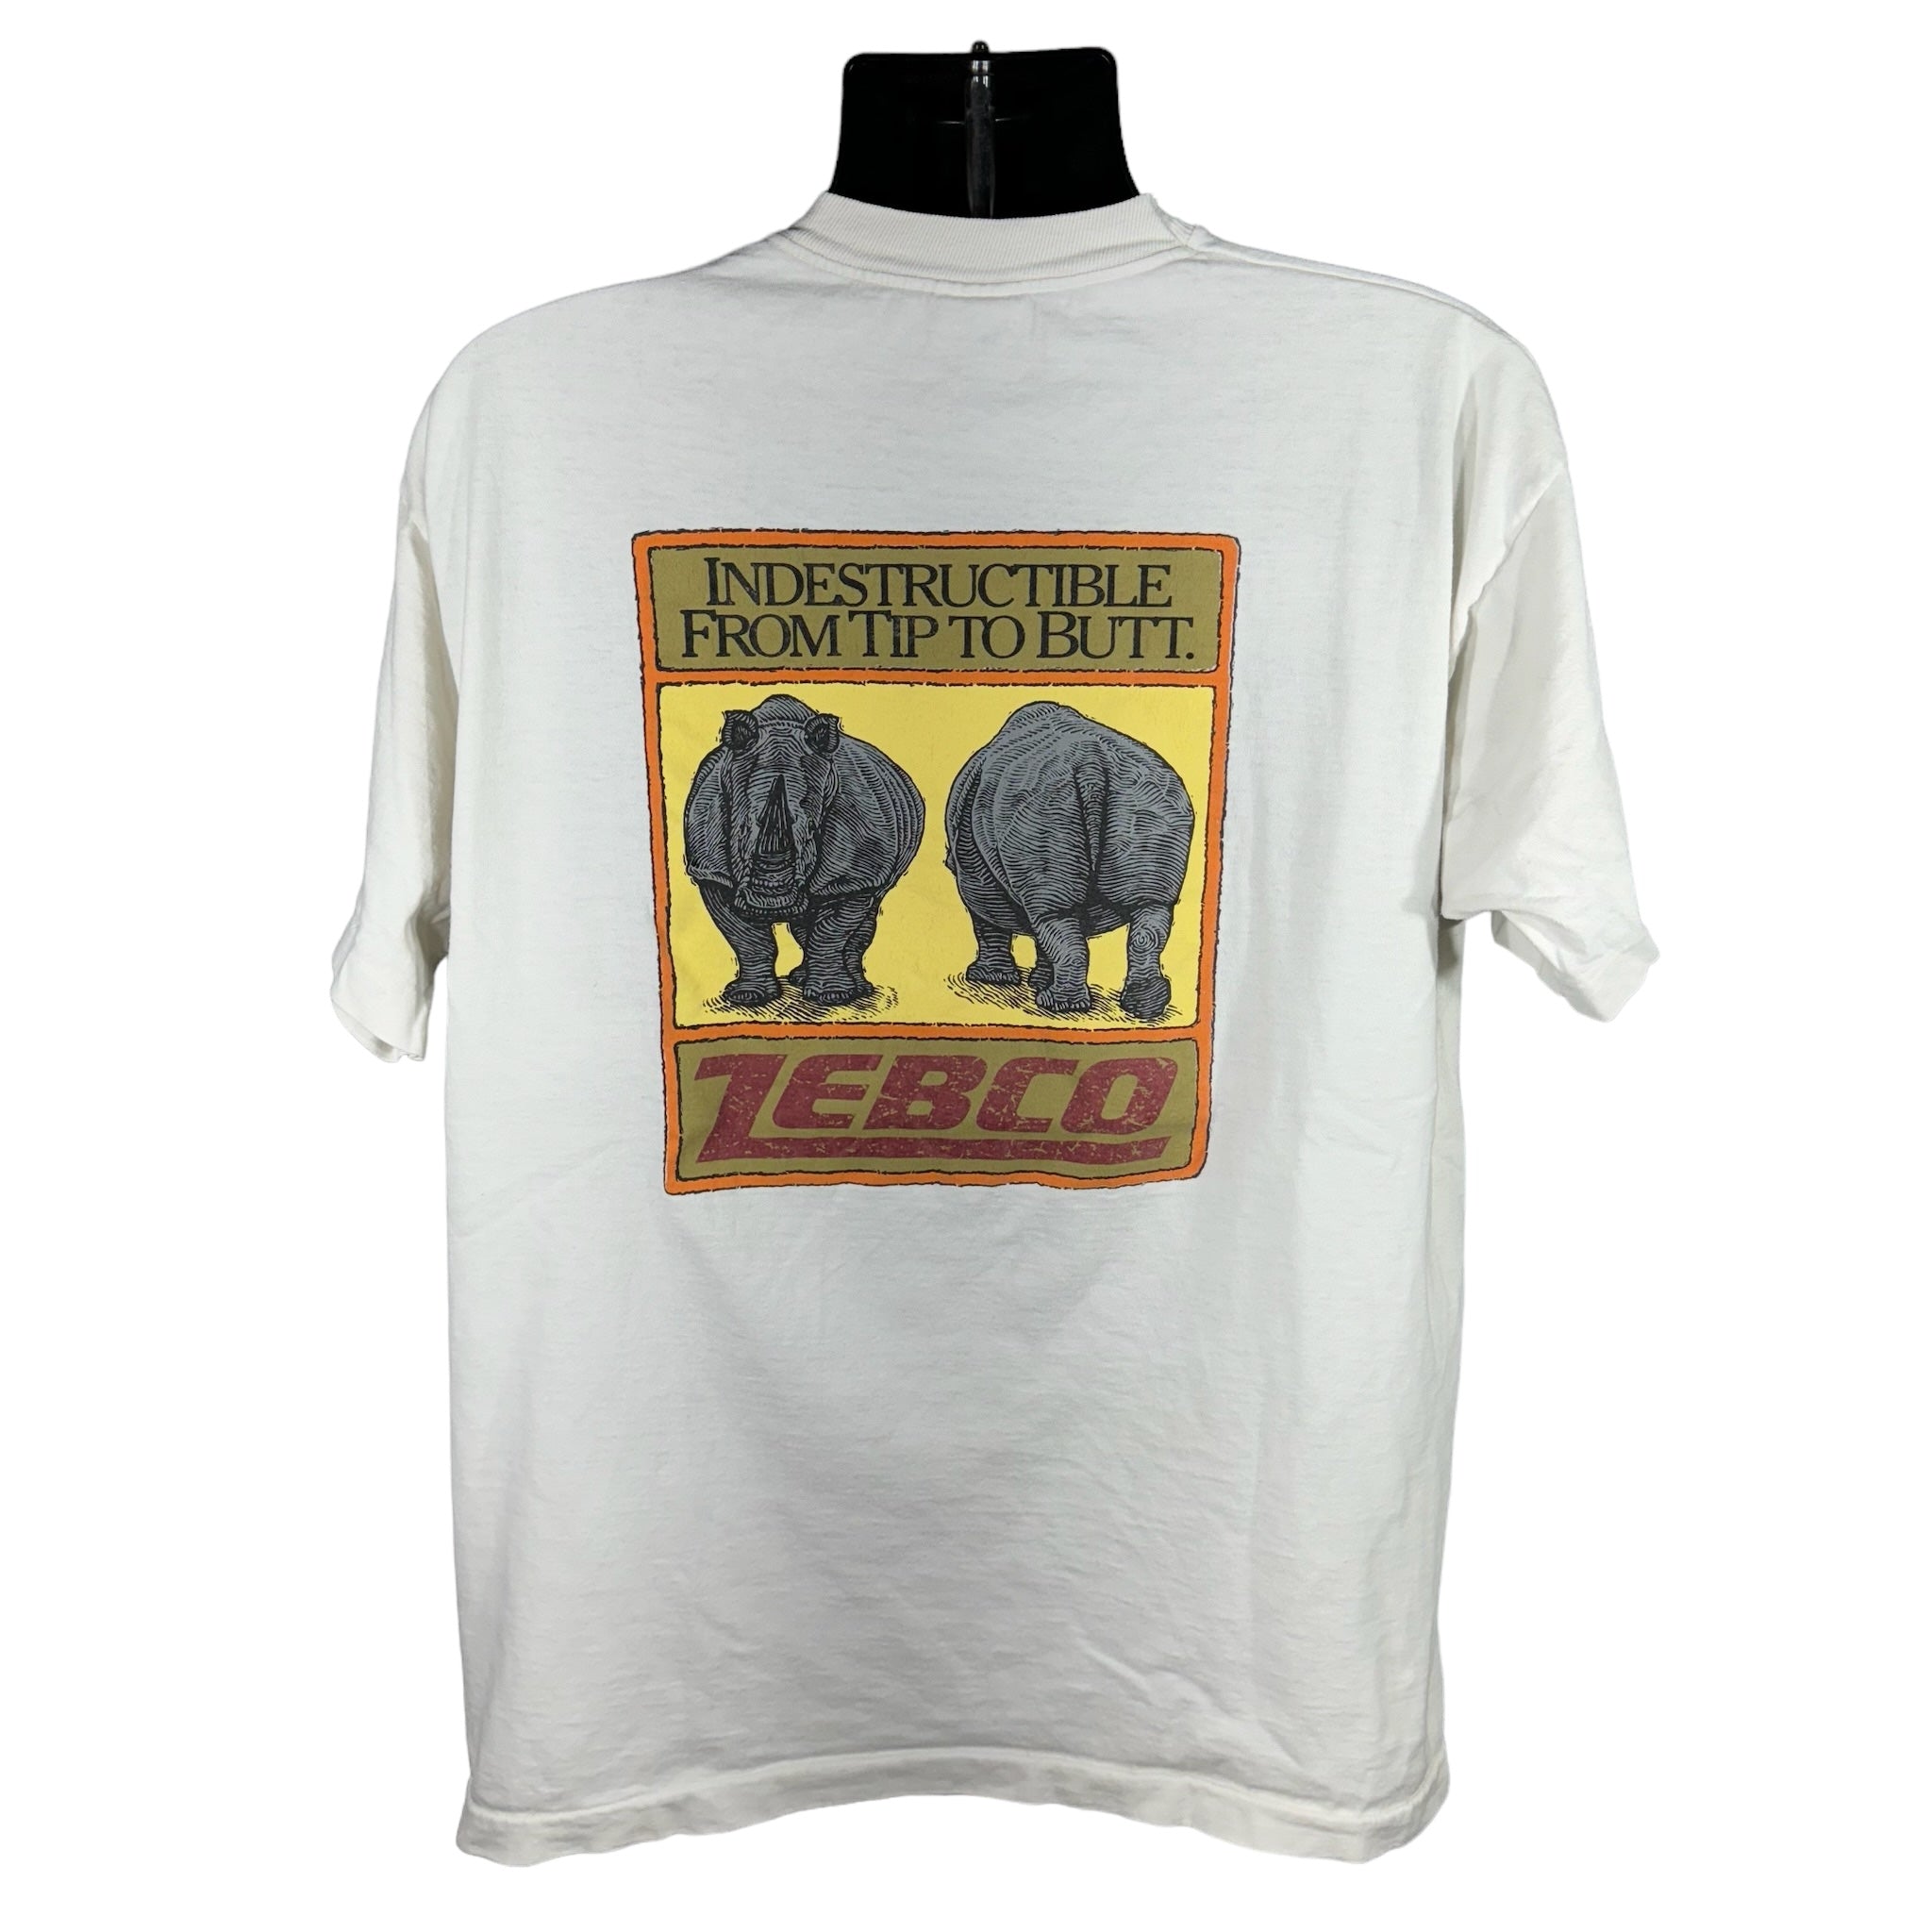 Vintage Zebco "Indestructible From Tip To Butt" Tee Mullet 90s